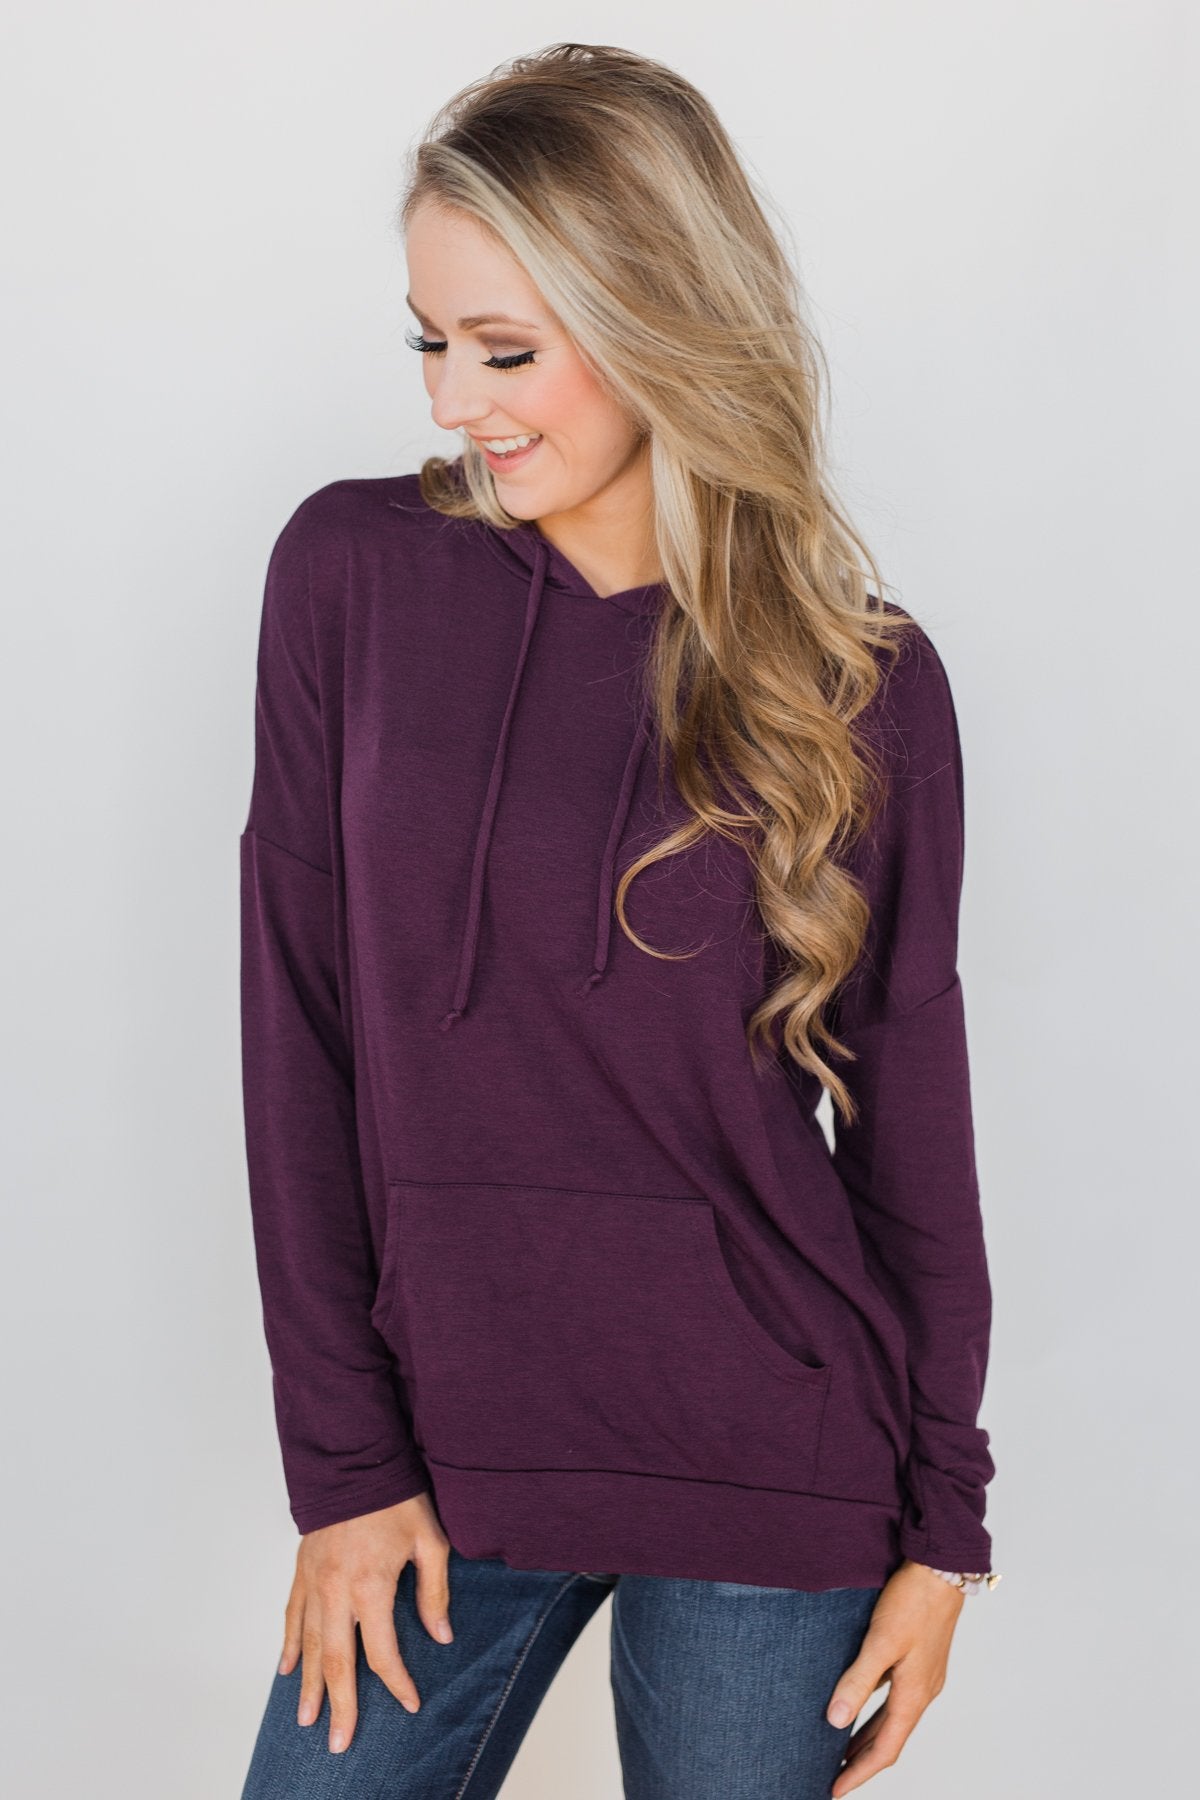 Once In A While Lightweight Hoodie- Eggplant